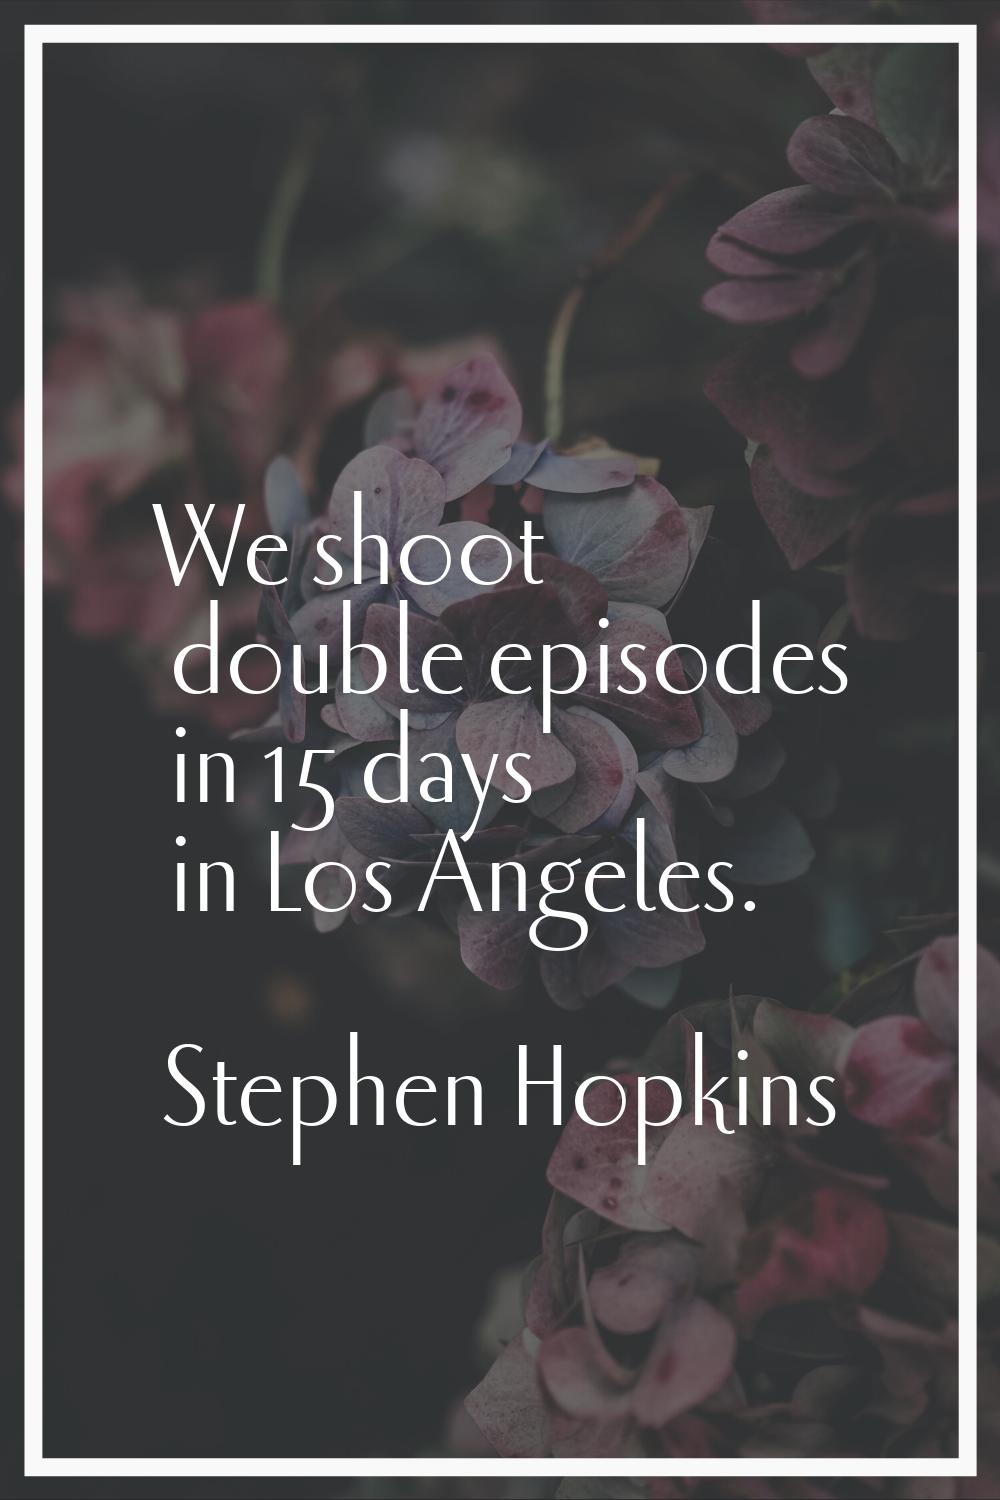 We shoot double episodes in 15 days in Los Angeles.